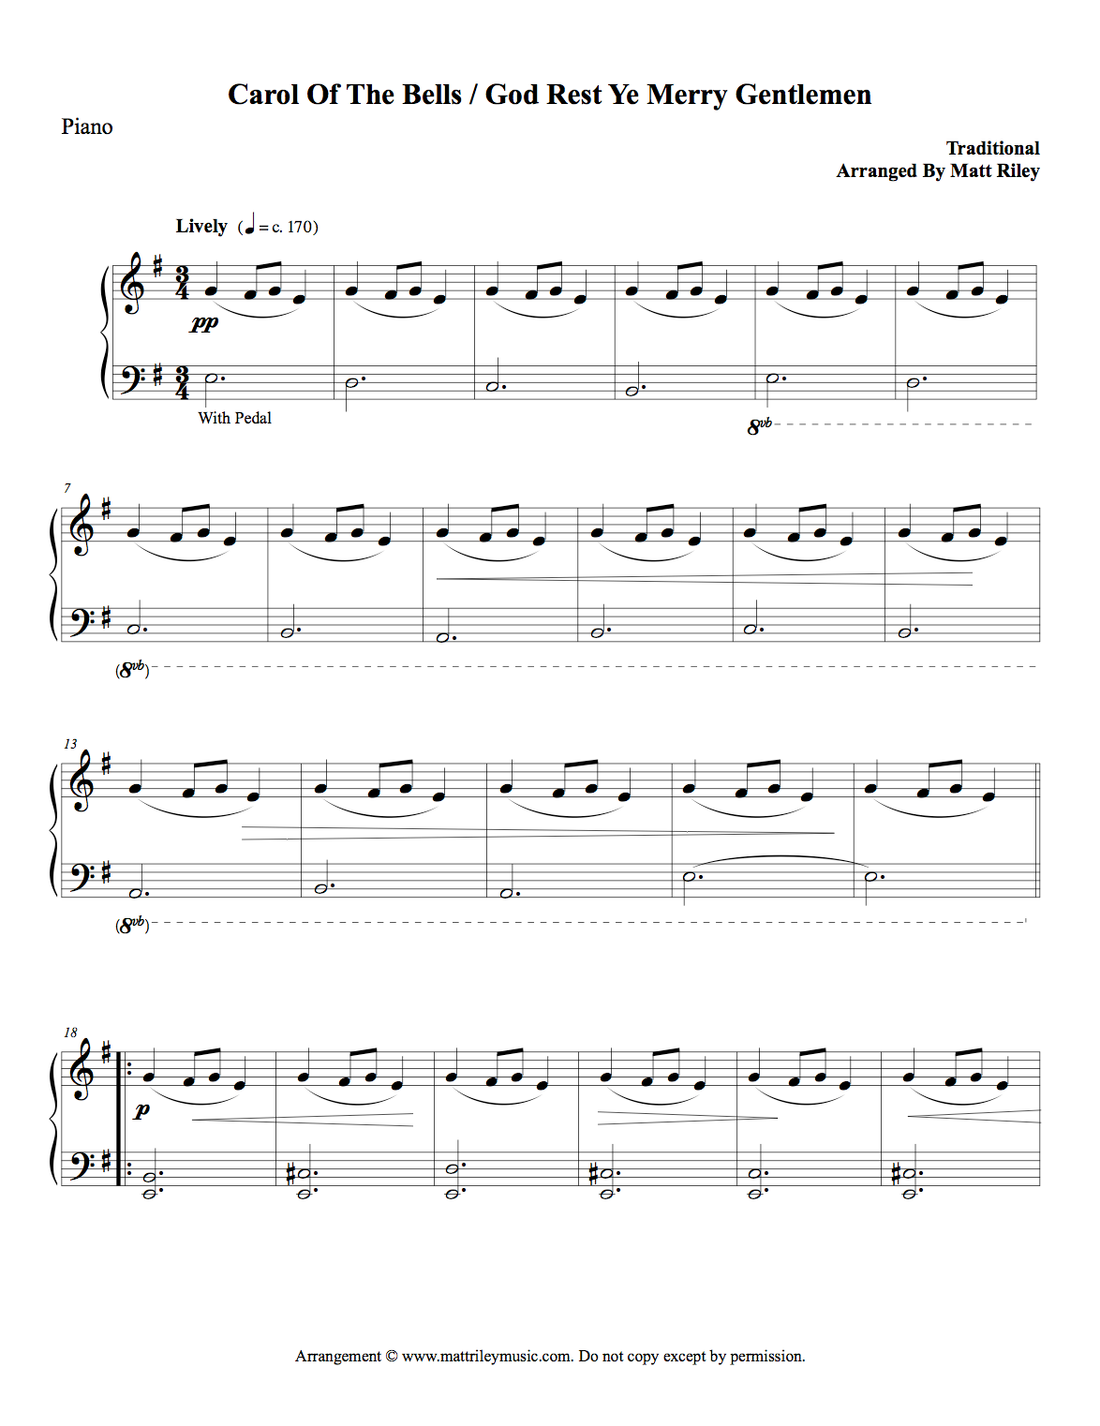 Piano Page 1 Preview
